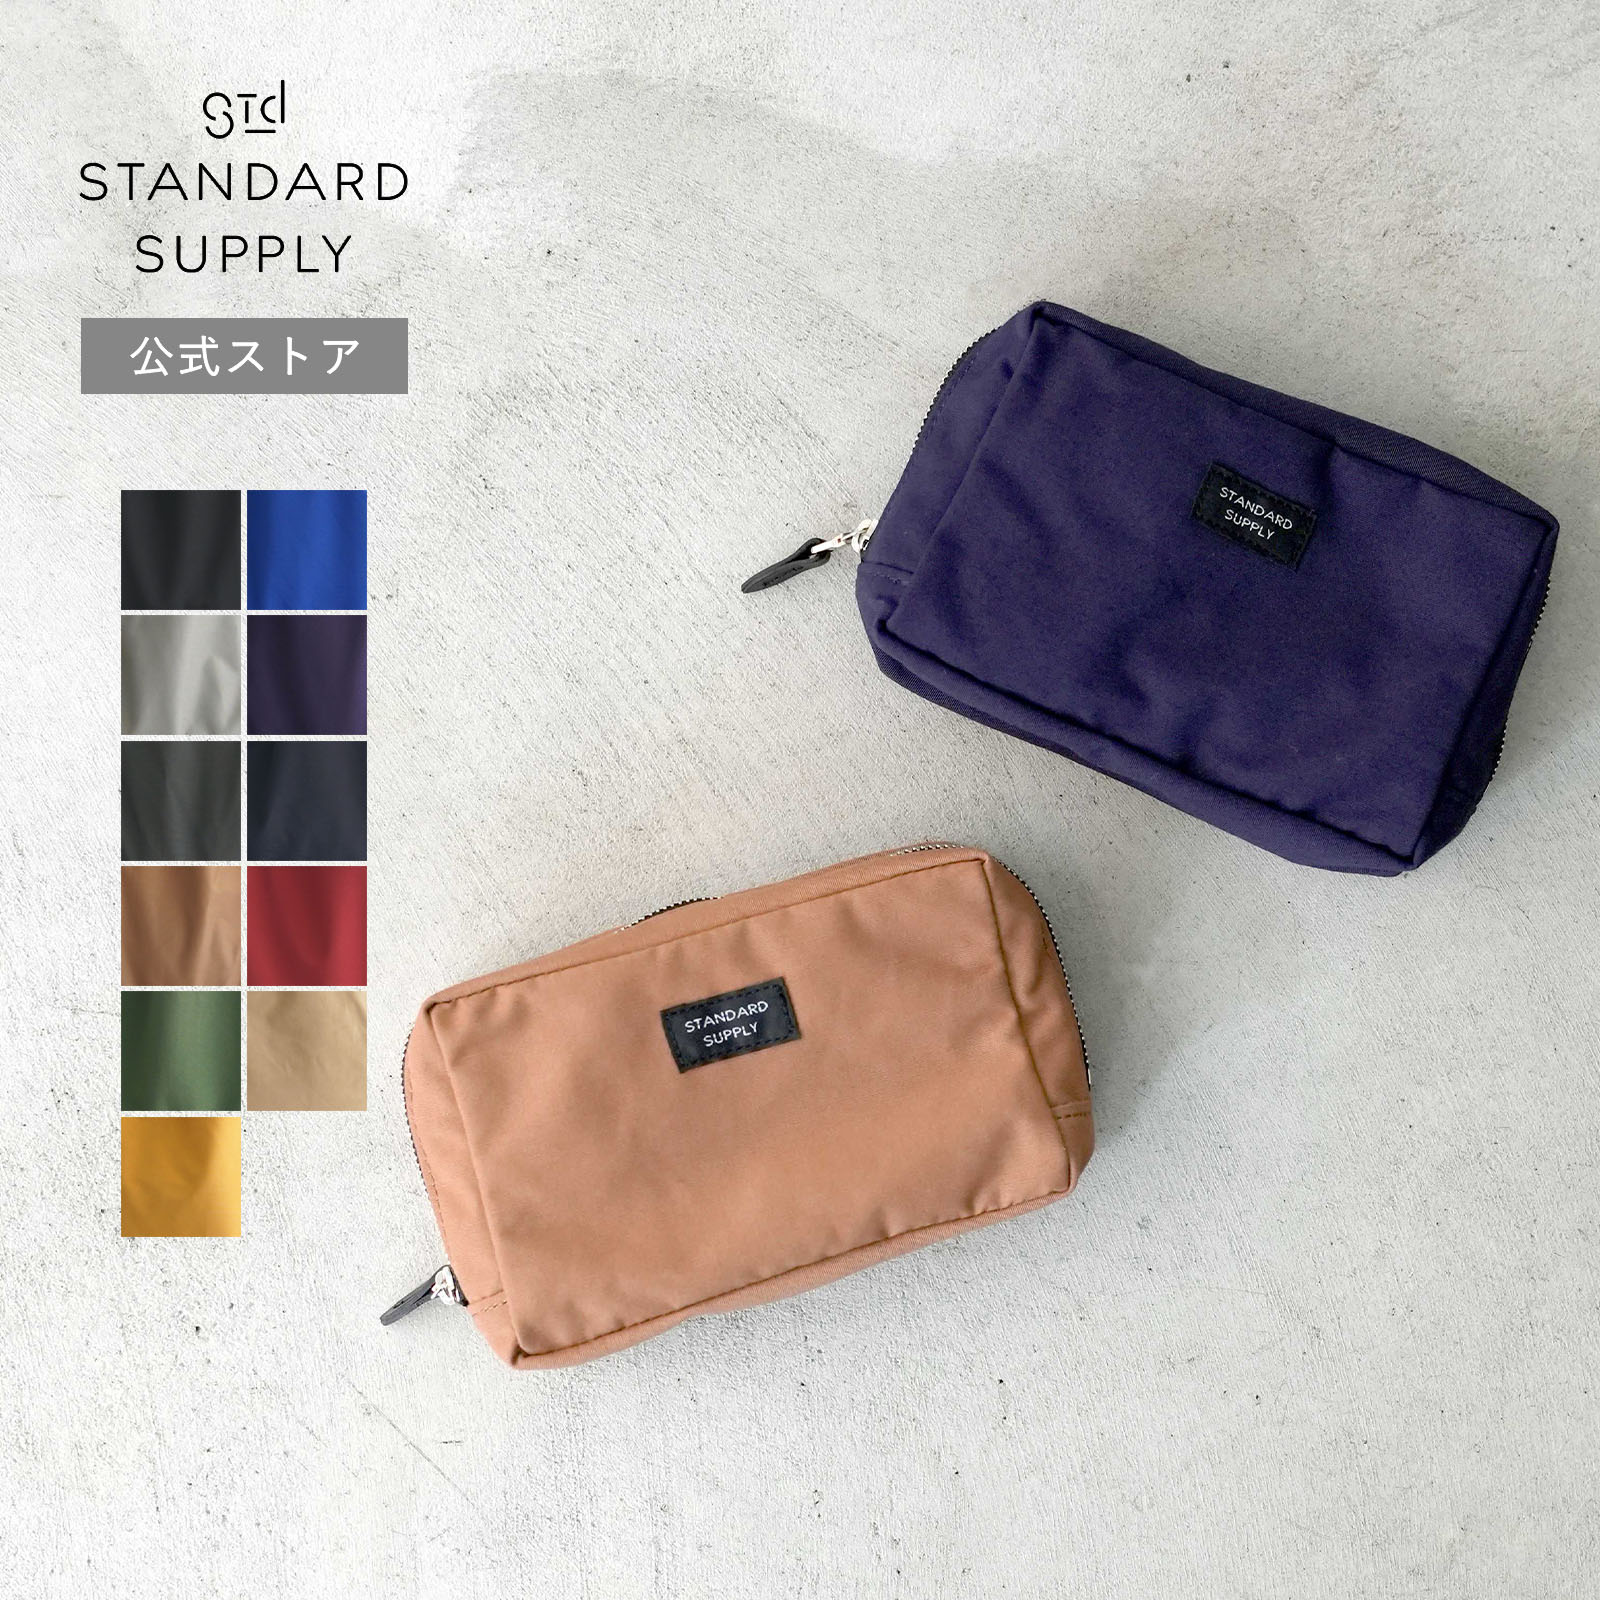  XgA X^_[hTvC VvVeB XNGA|[`G |[` Vv RX|[`  J[hP[X Y fB[X 4100147 STANDARD SUPPLY SIMPLICITY SQUARE POUCH M